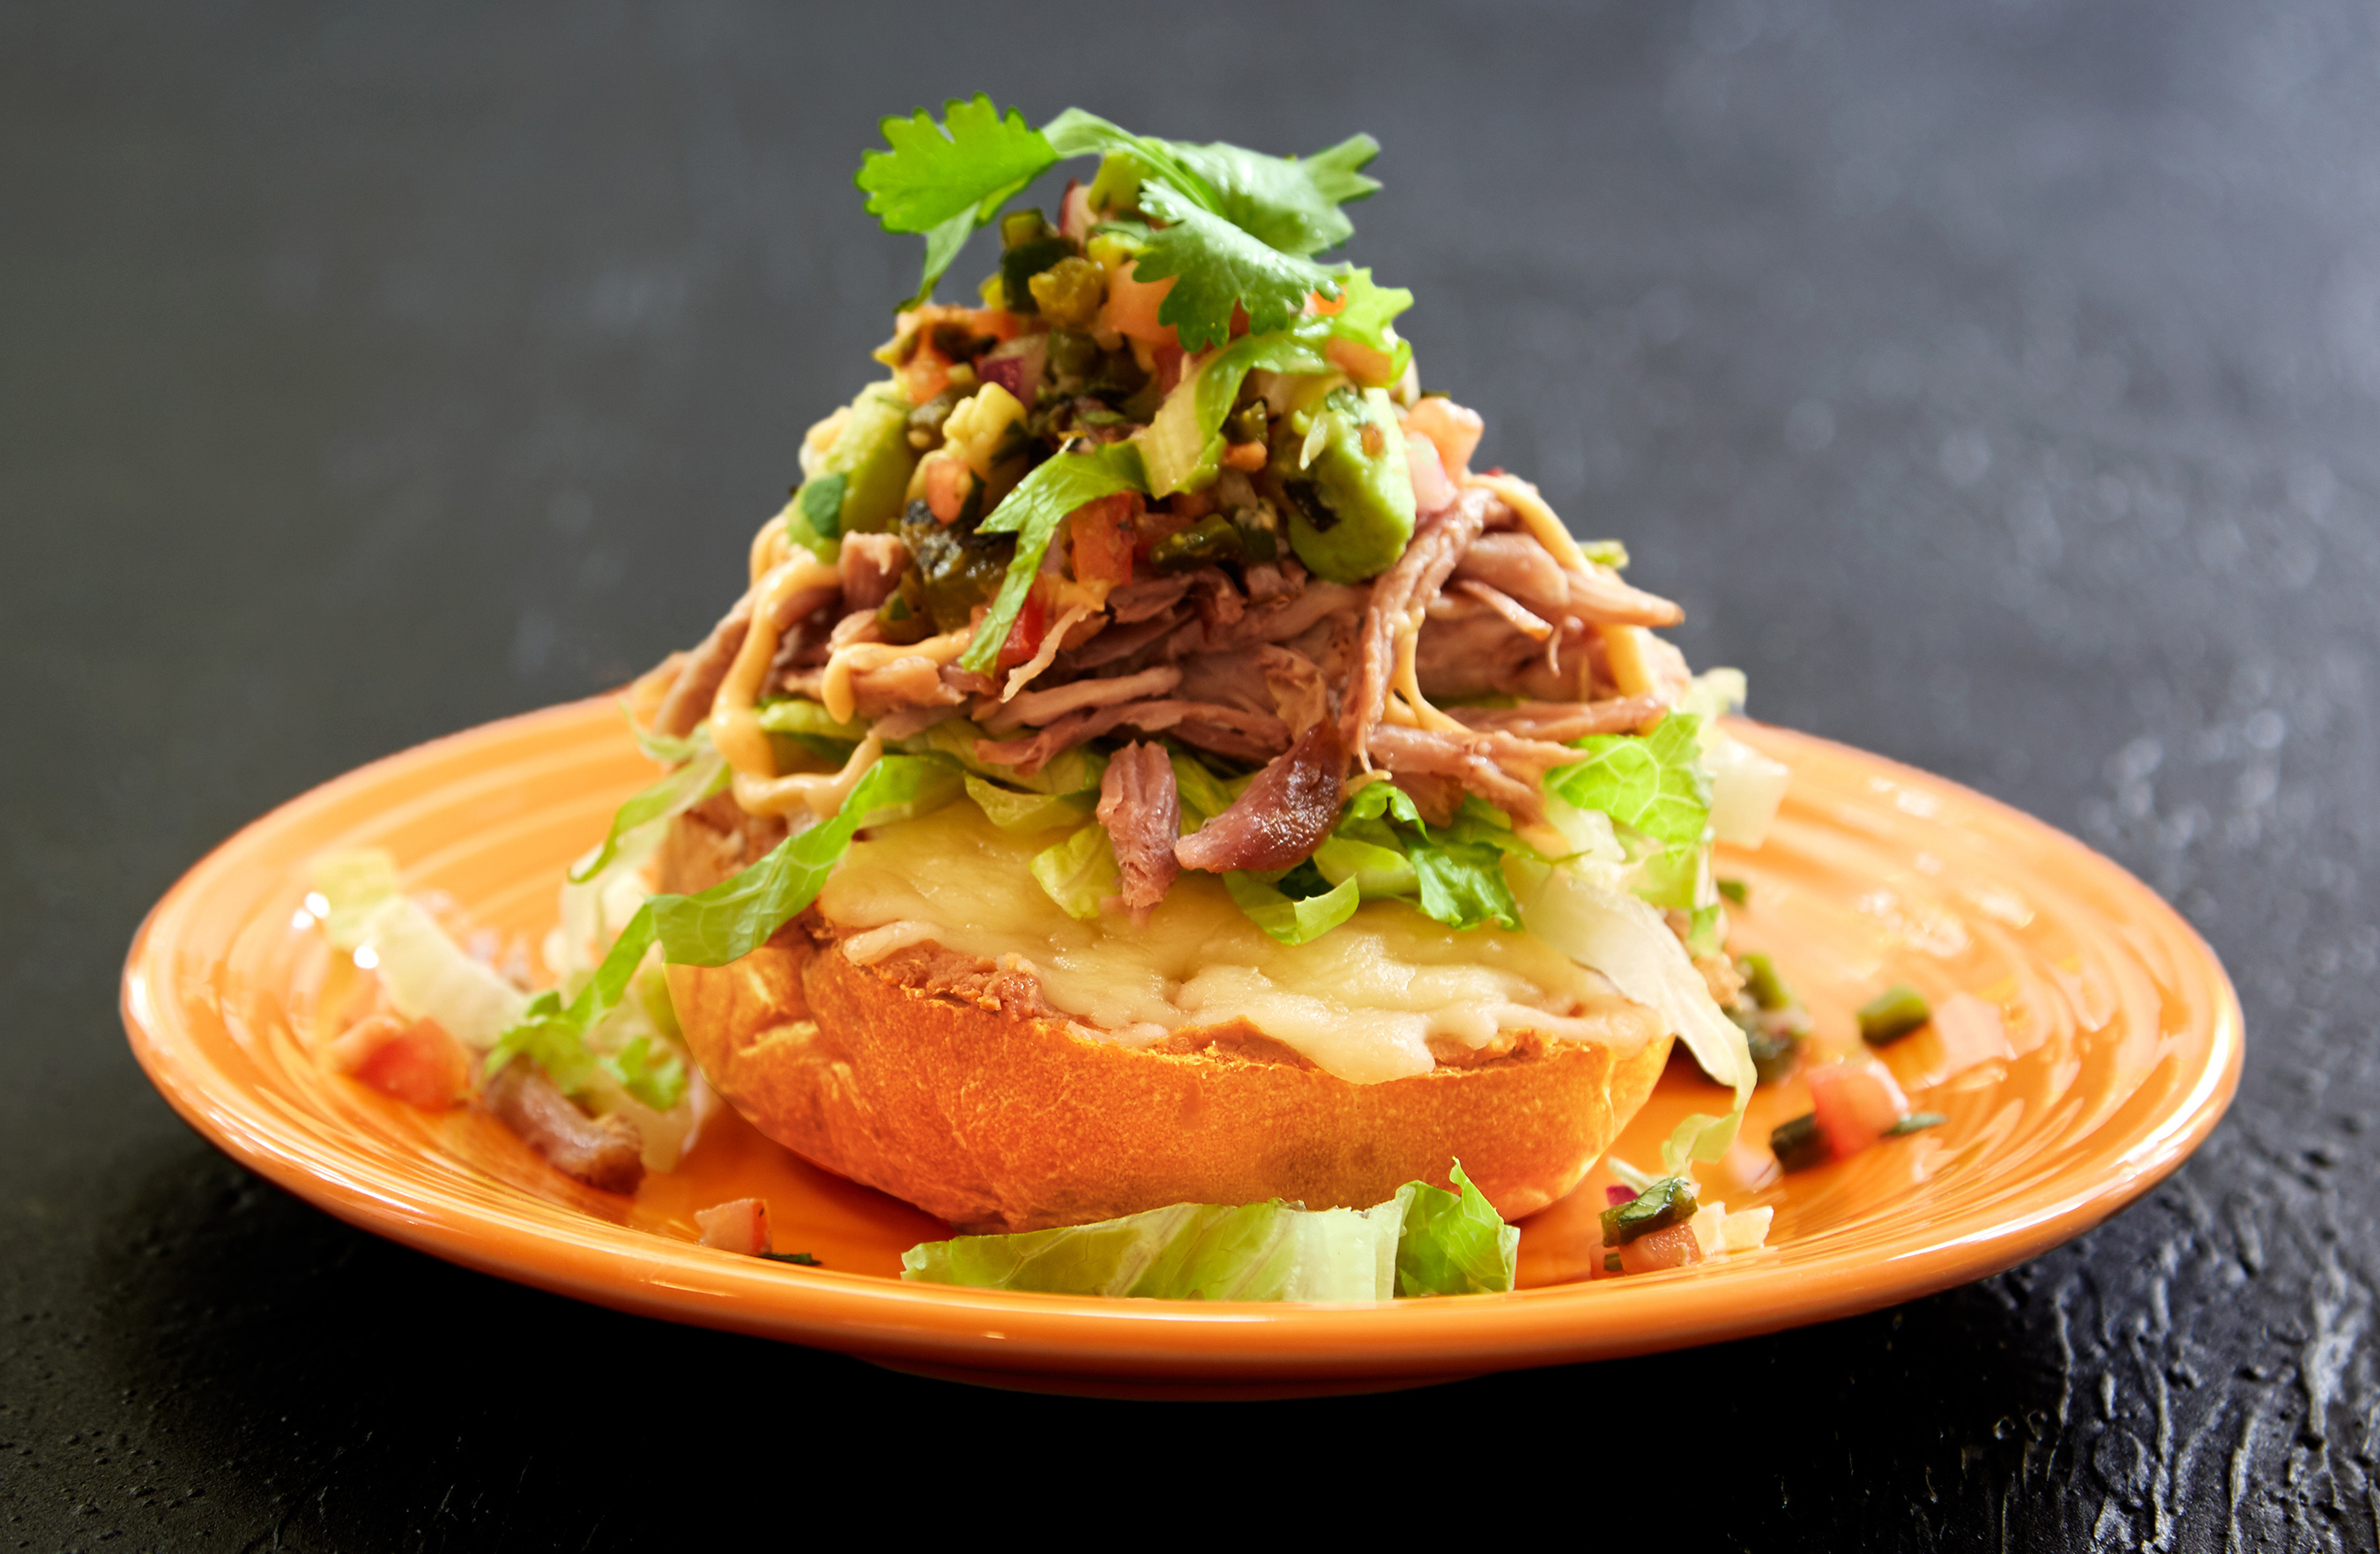 This take on the quintessential Mexican sandwich will transport you to your favorite street vendor or food truck.